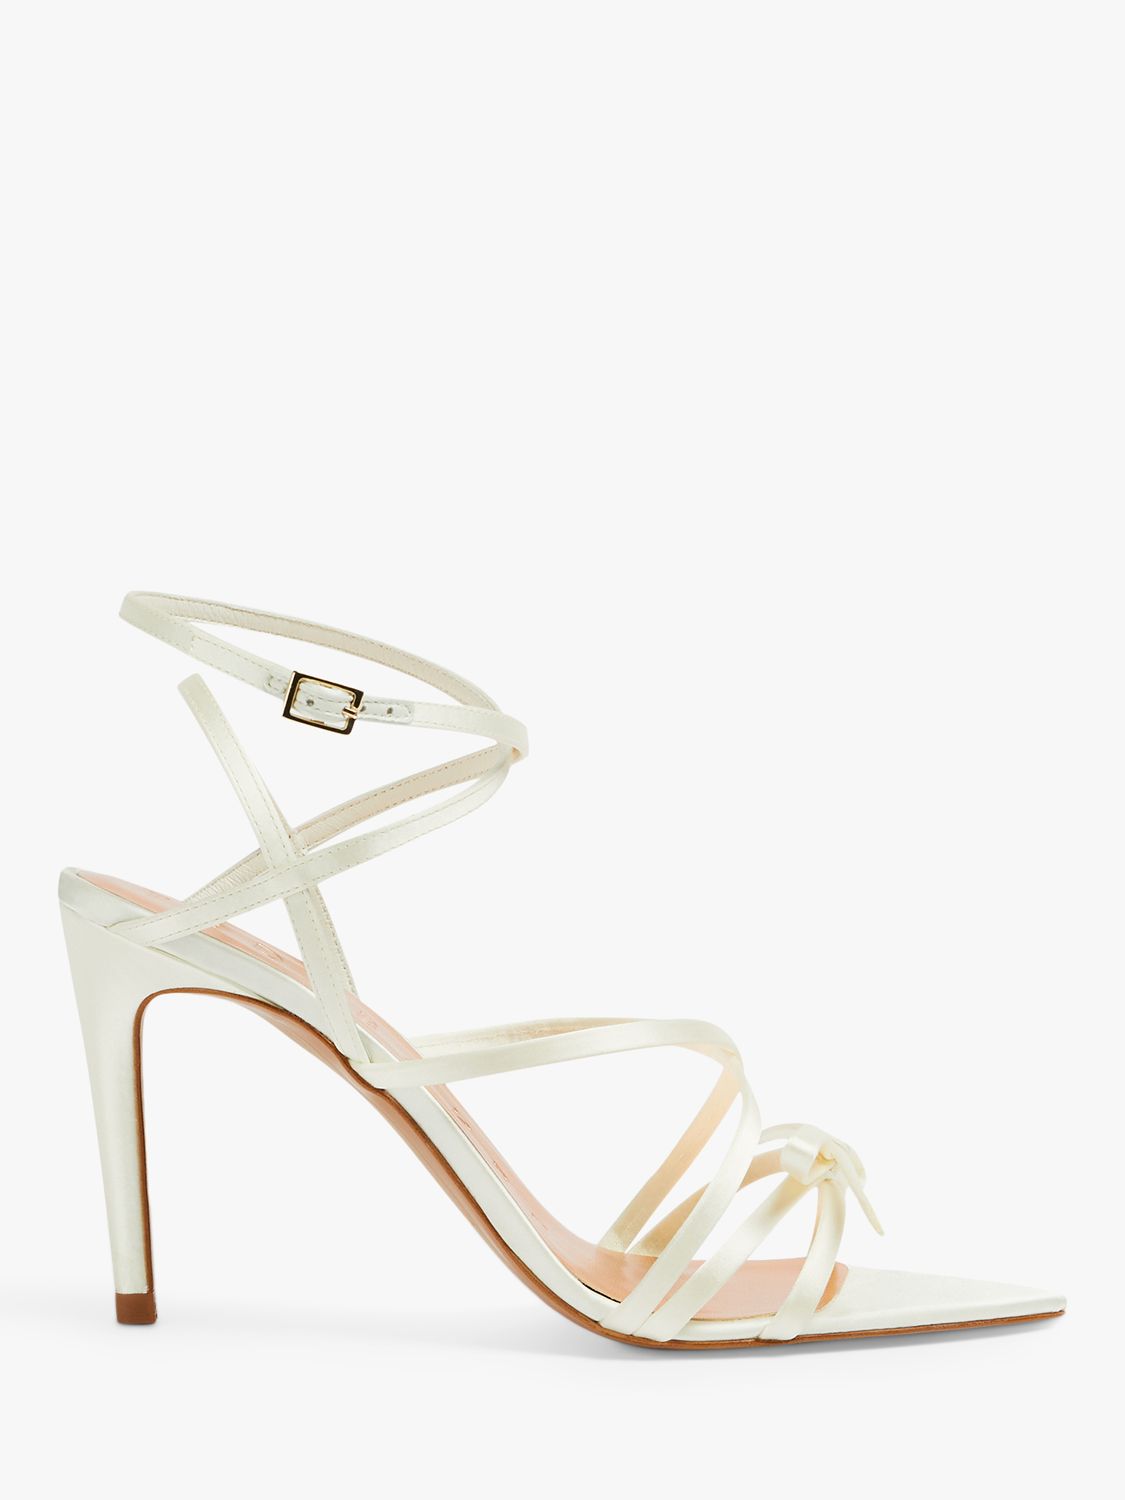 Ted Baker Relanas Leather Strappy Sandals at John Lewis & Partners